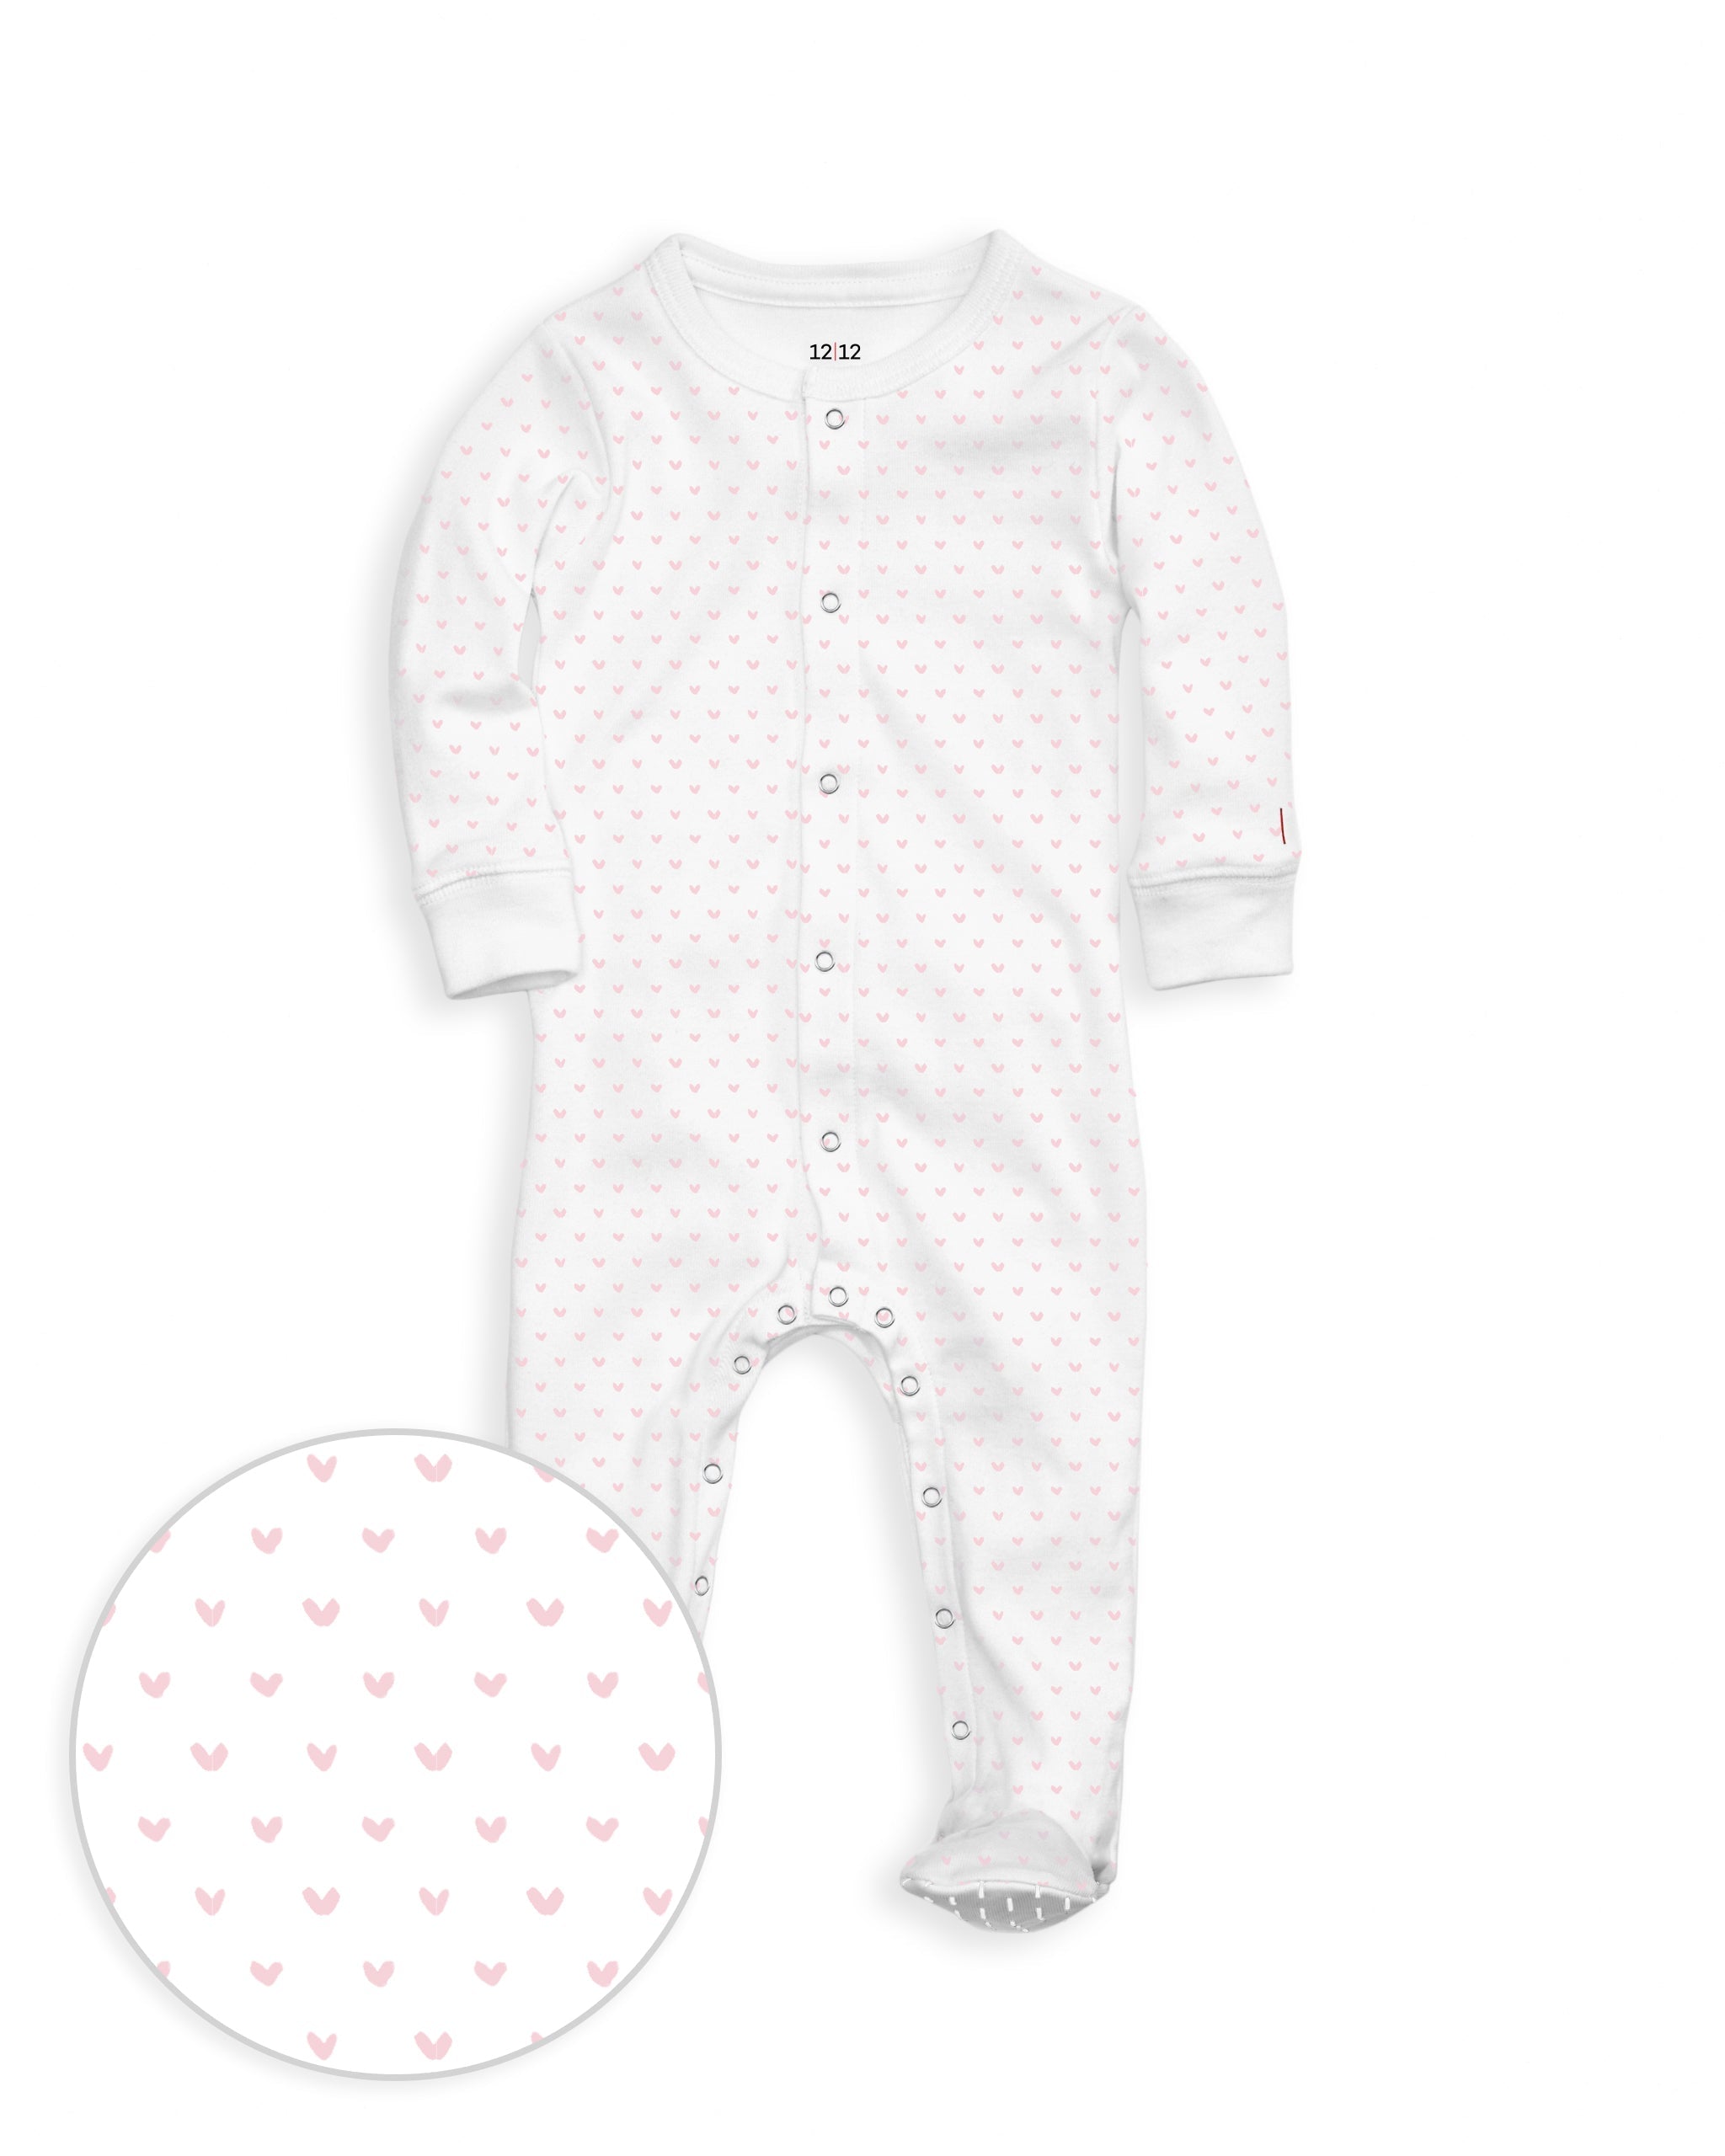 The Organic Snap Footie [Pink Tiny Hearts]